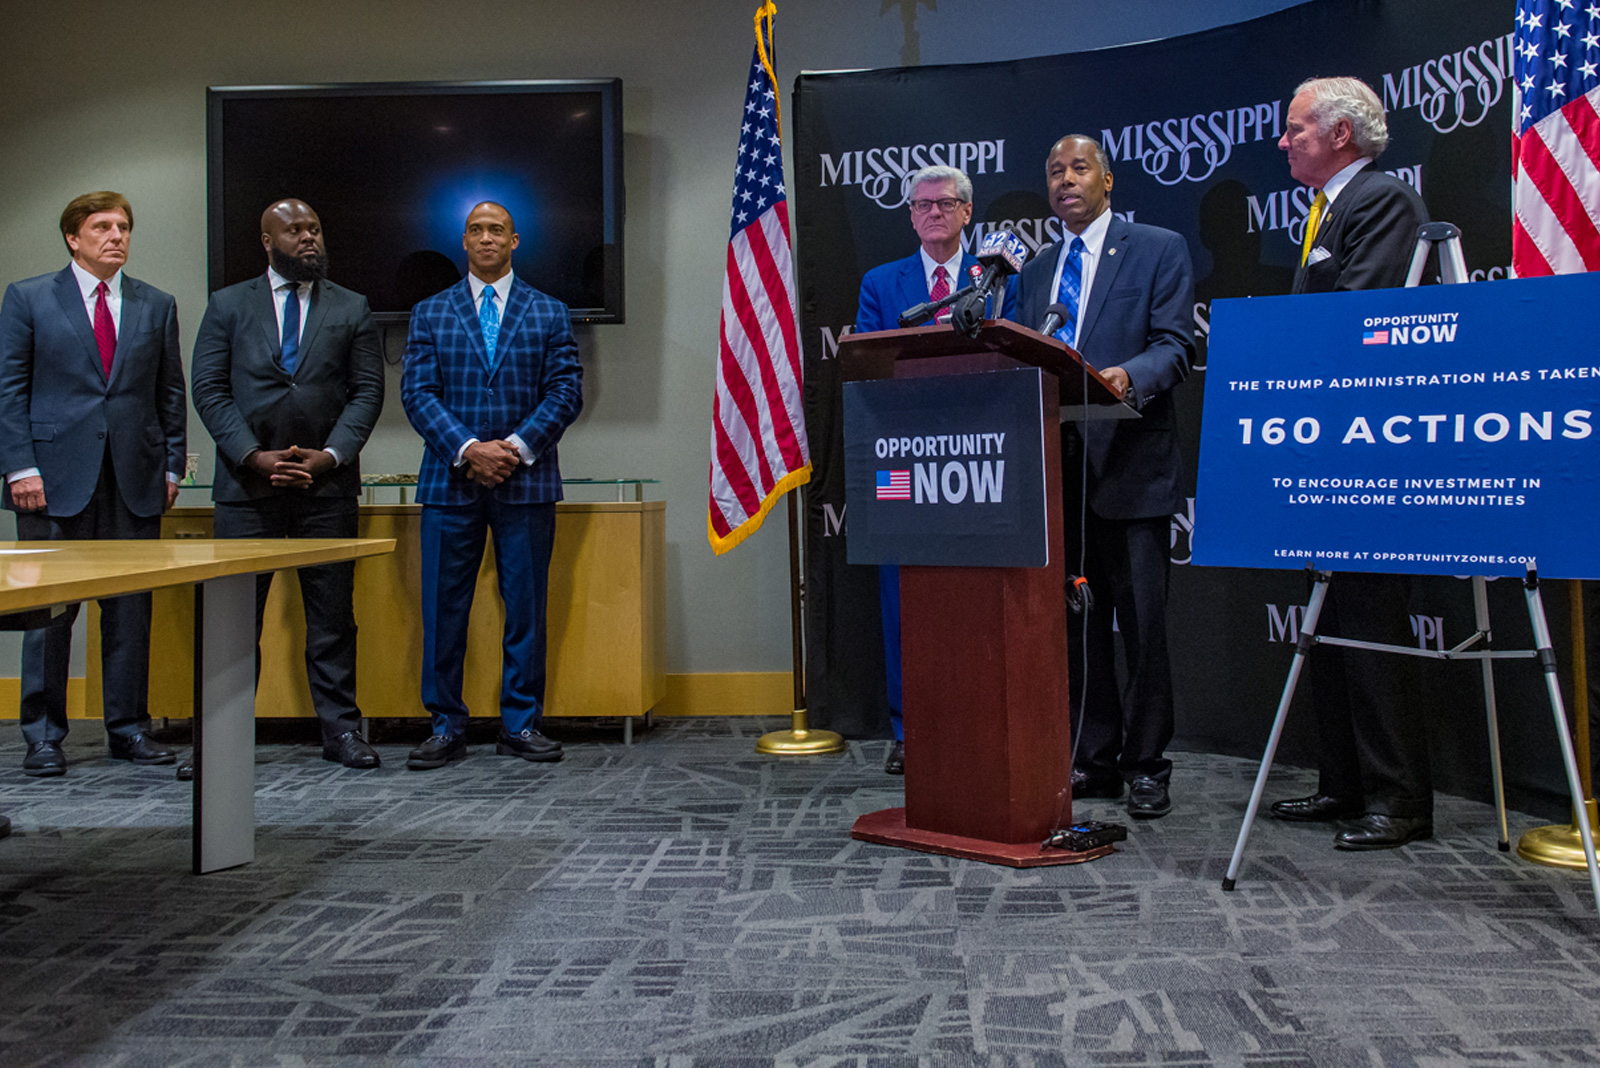 Secretary Carson, joined by Governors Phil Bryant and Henry McMaster, announces 160 actions taken by the White House Opportunity and Revitalization Council to encourage investment in low-income communities